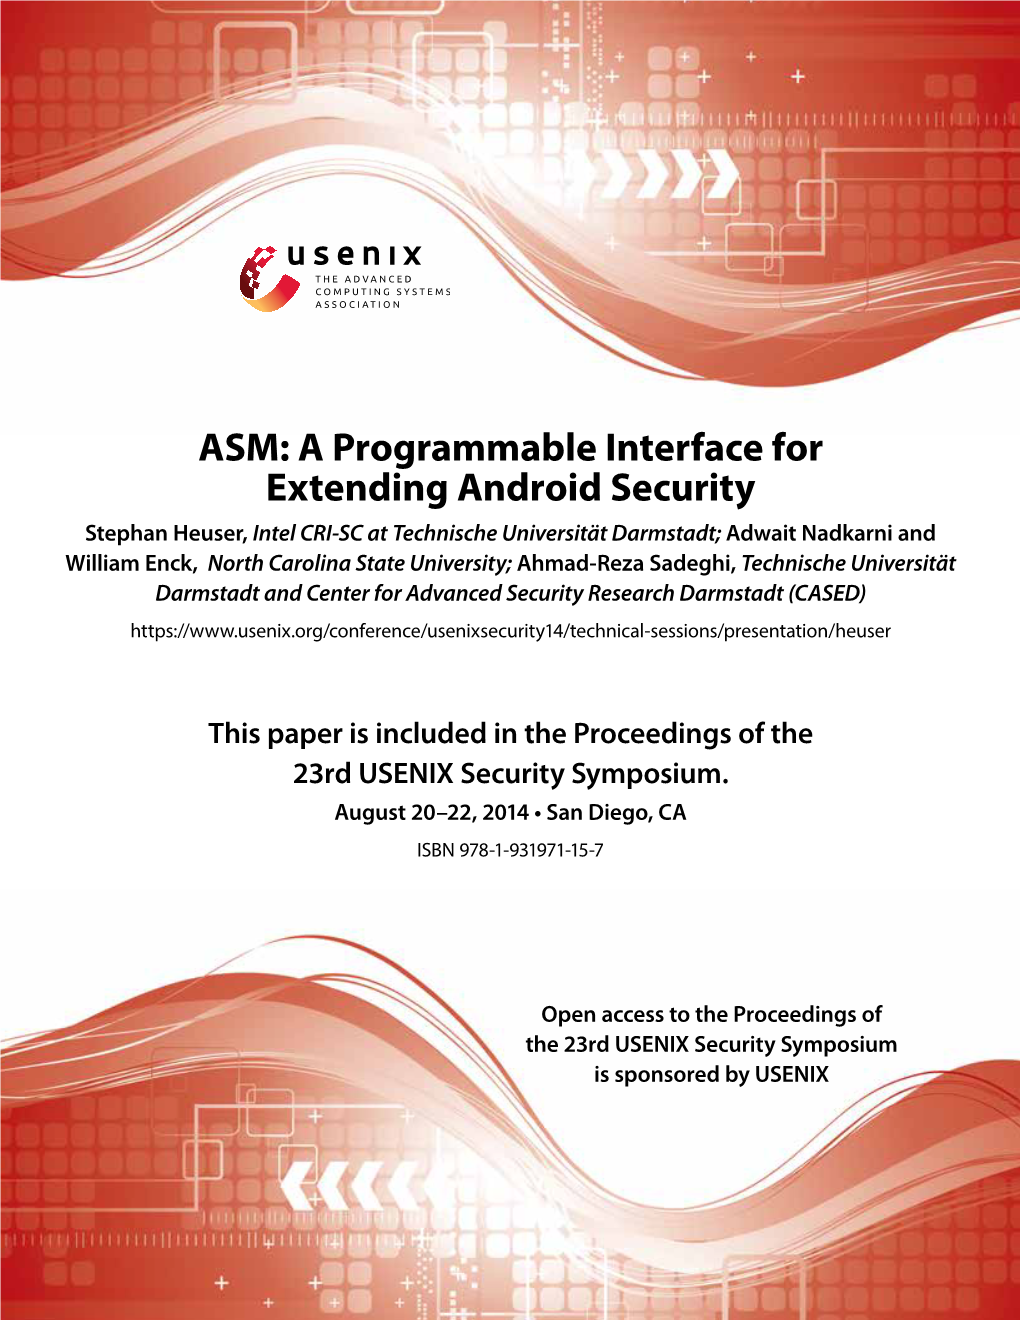 ASM: a Programmable Interface for Extending Android Security